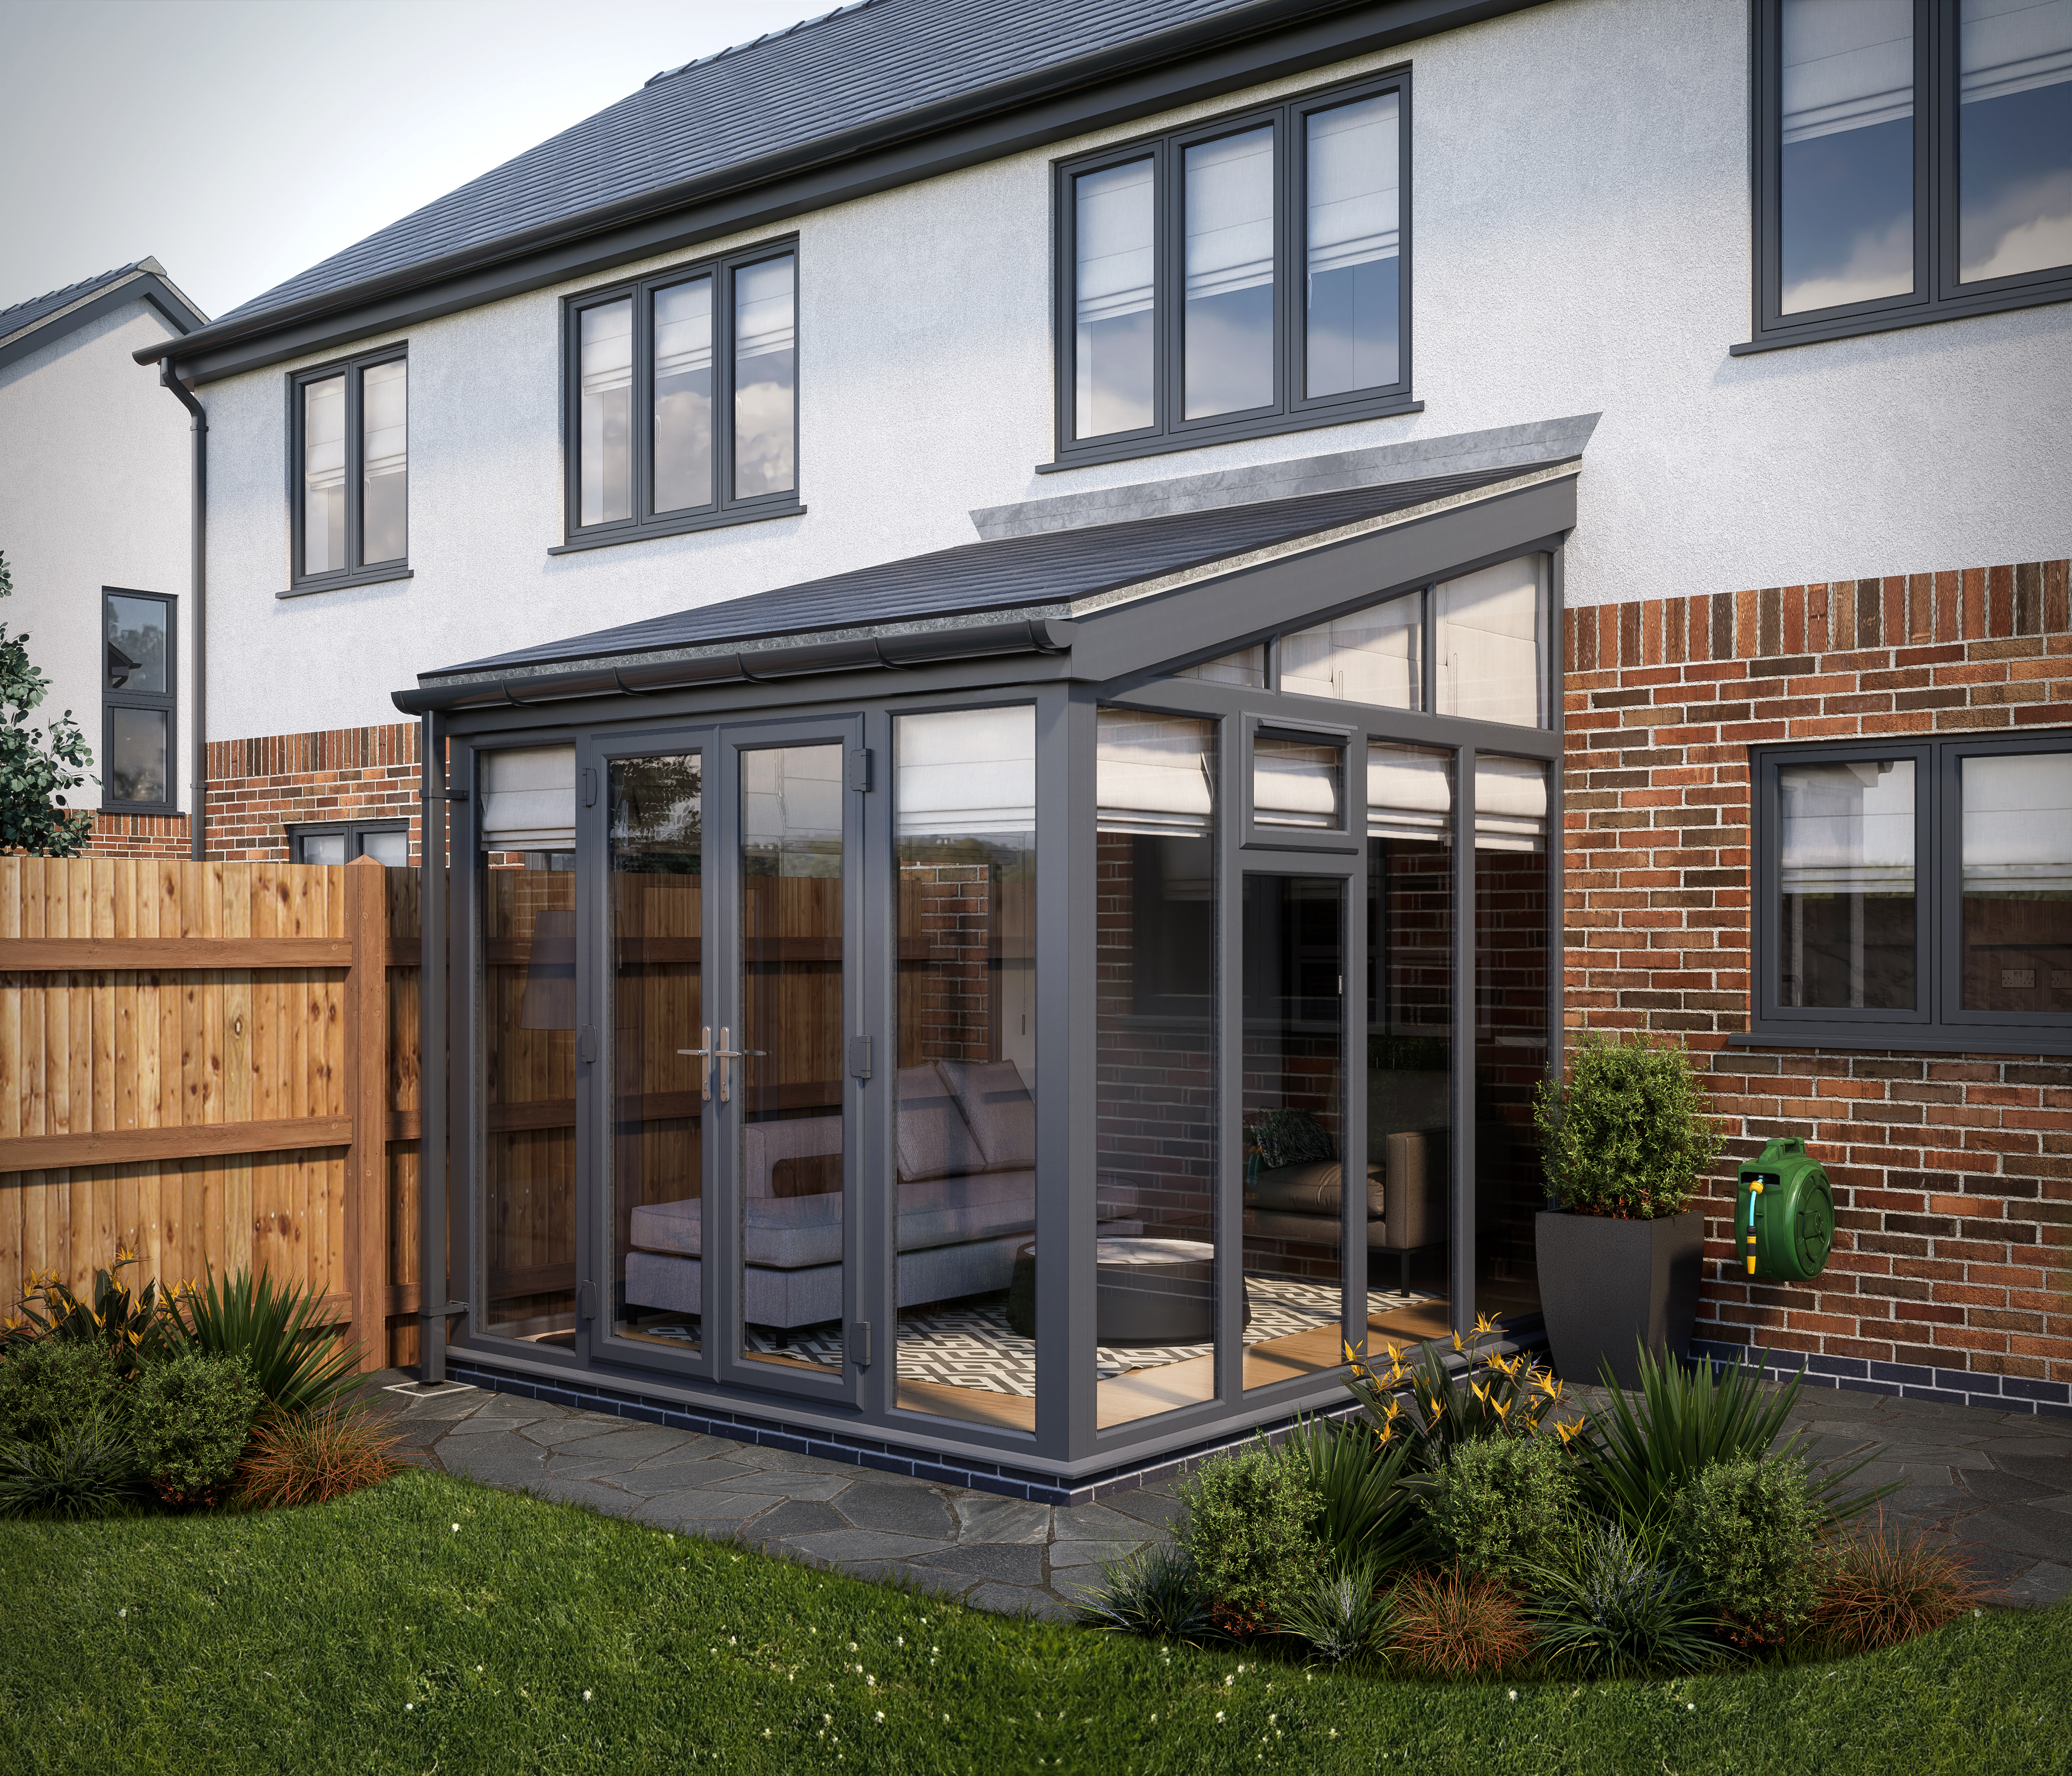 Image of SOLid Roof Full Height Lean to Conservatory Grey Frames with Titanium Grey Tiles - 13 x 13ft